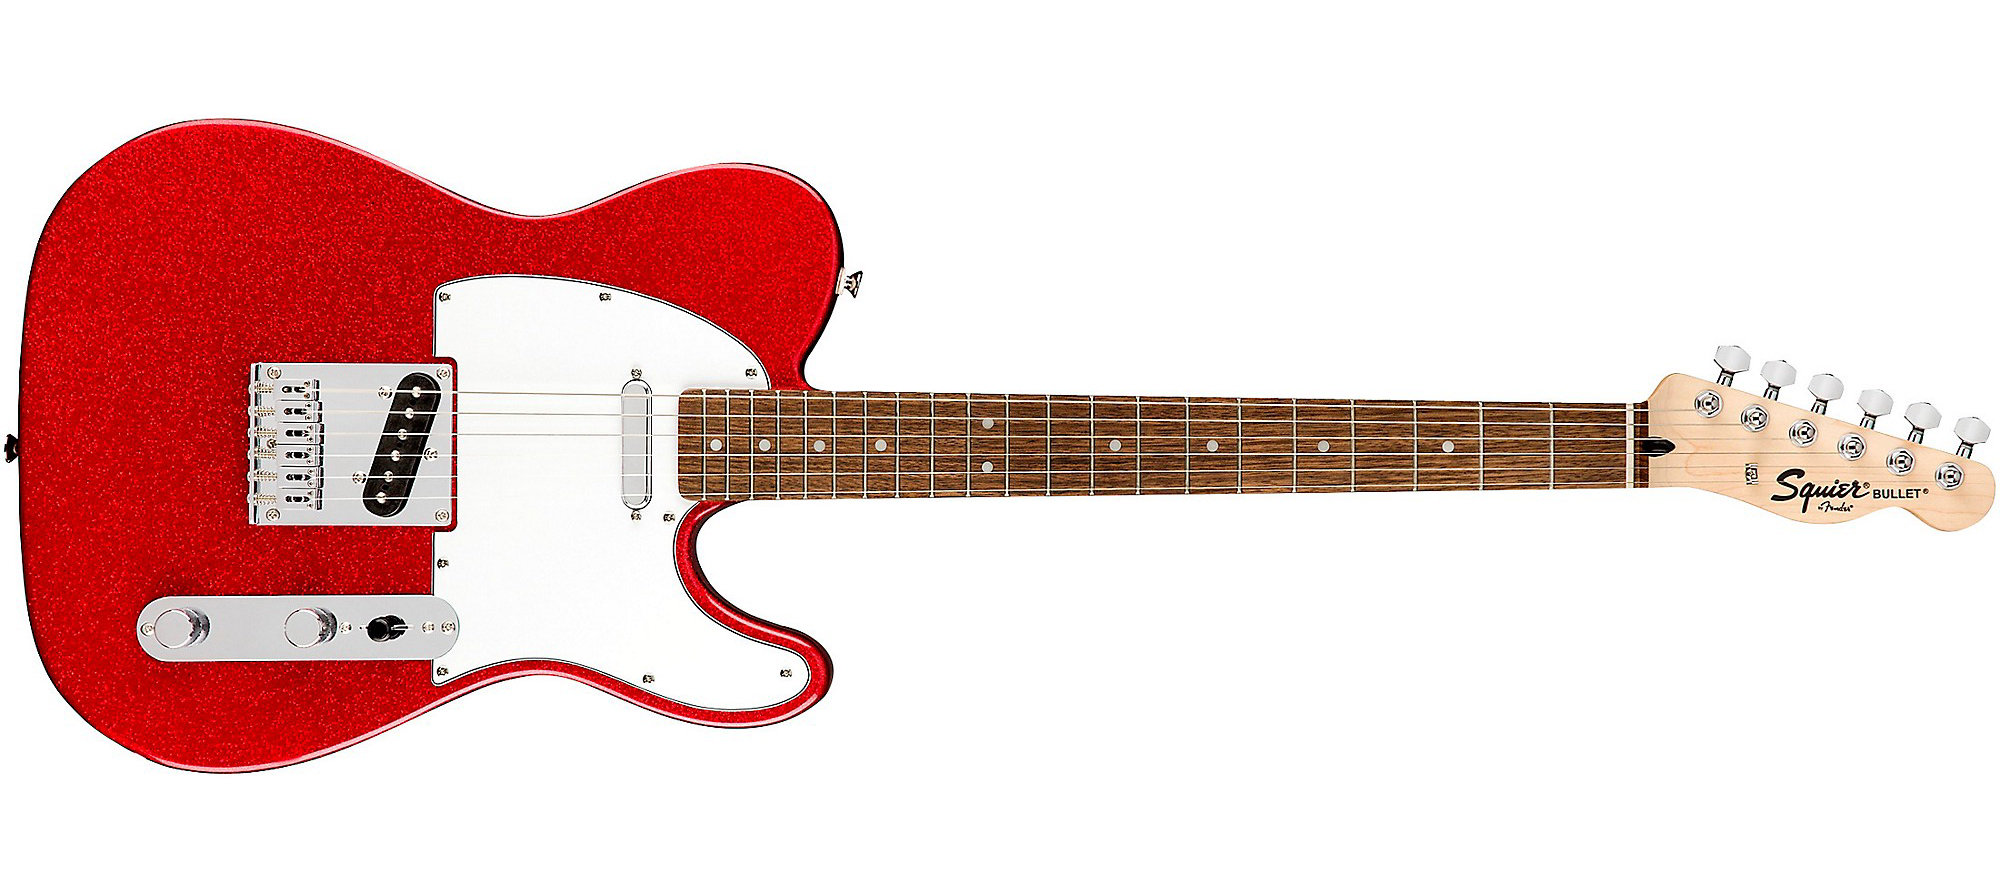 Squier Limited-Edition Bullet Telecaster: Red Sparkle $139 (today only) $139.99